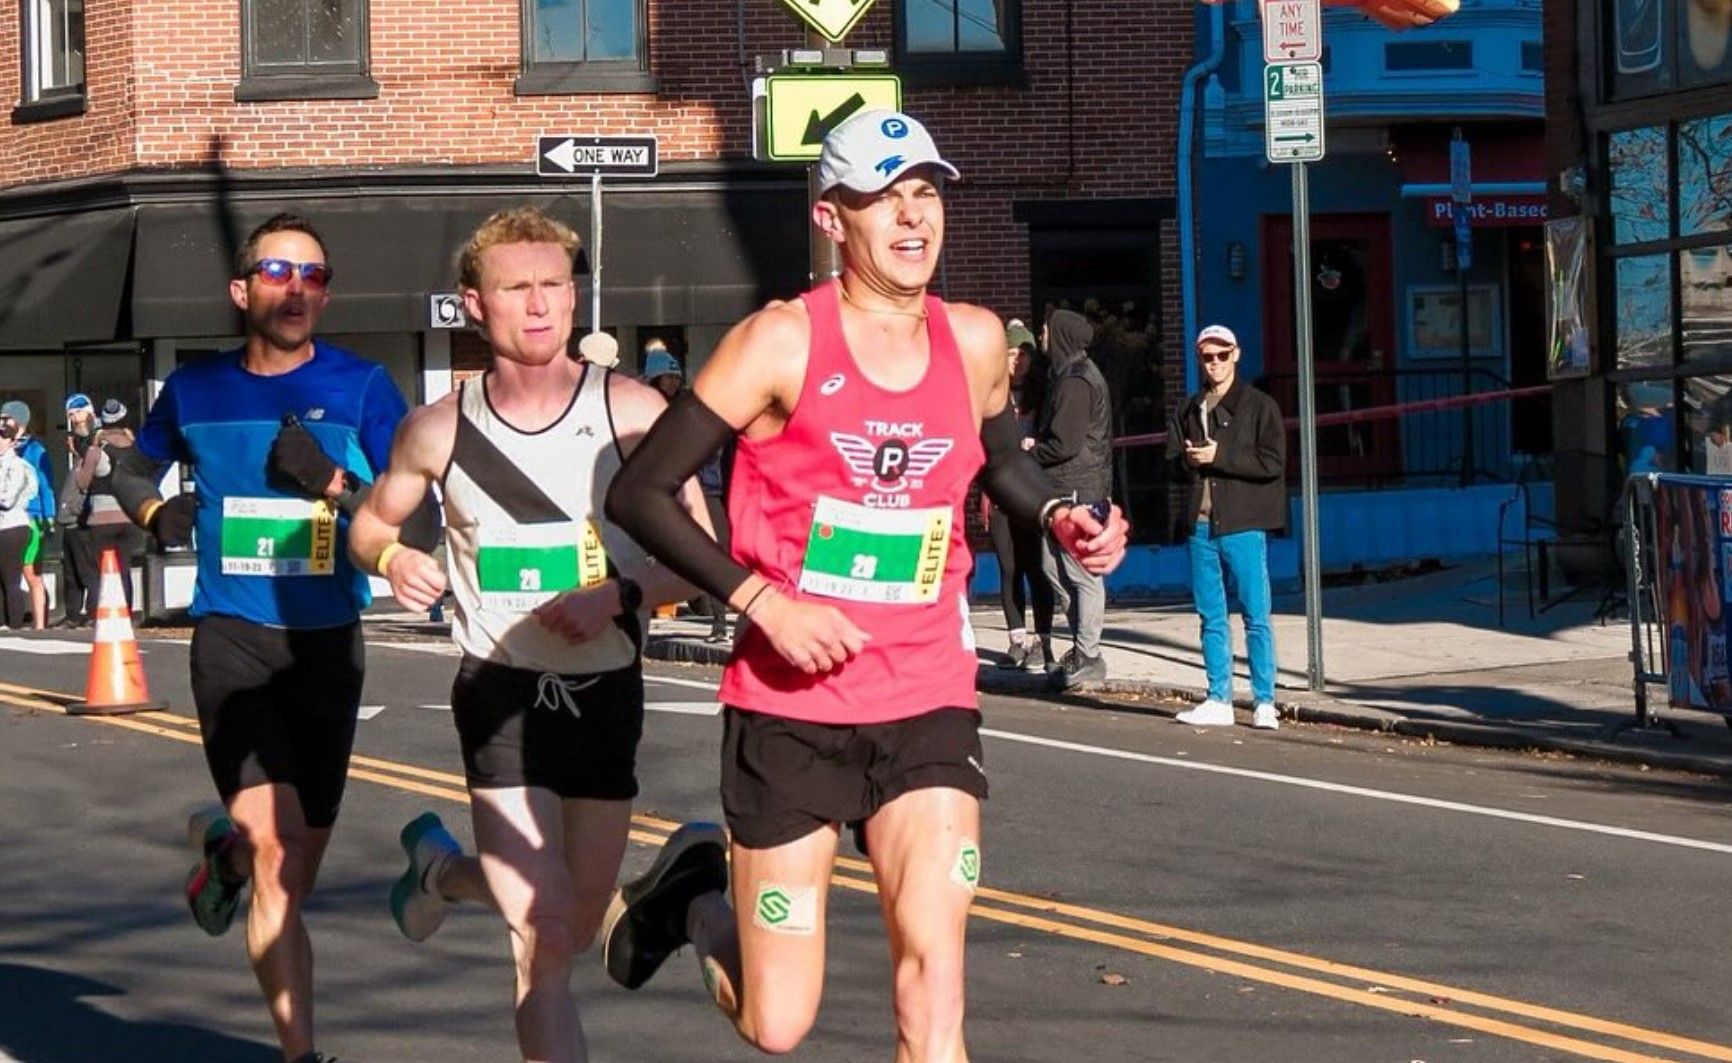 'What a sad hill to die on': Outrage as American disqualified over minor marathon violation